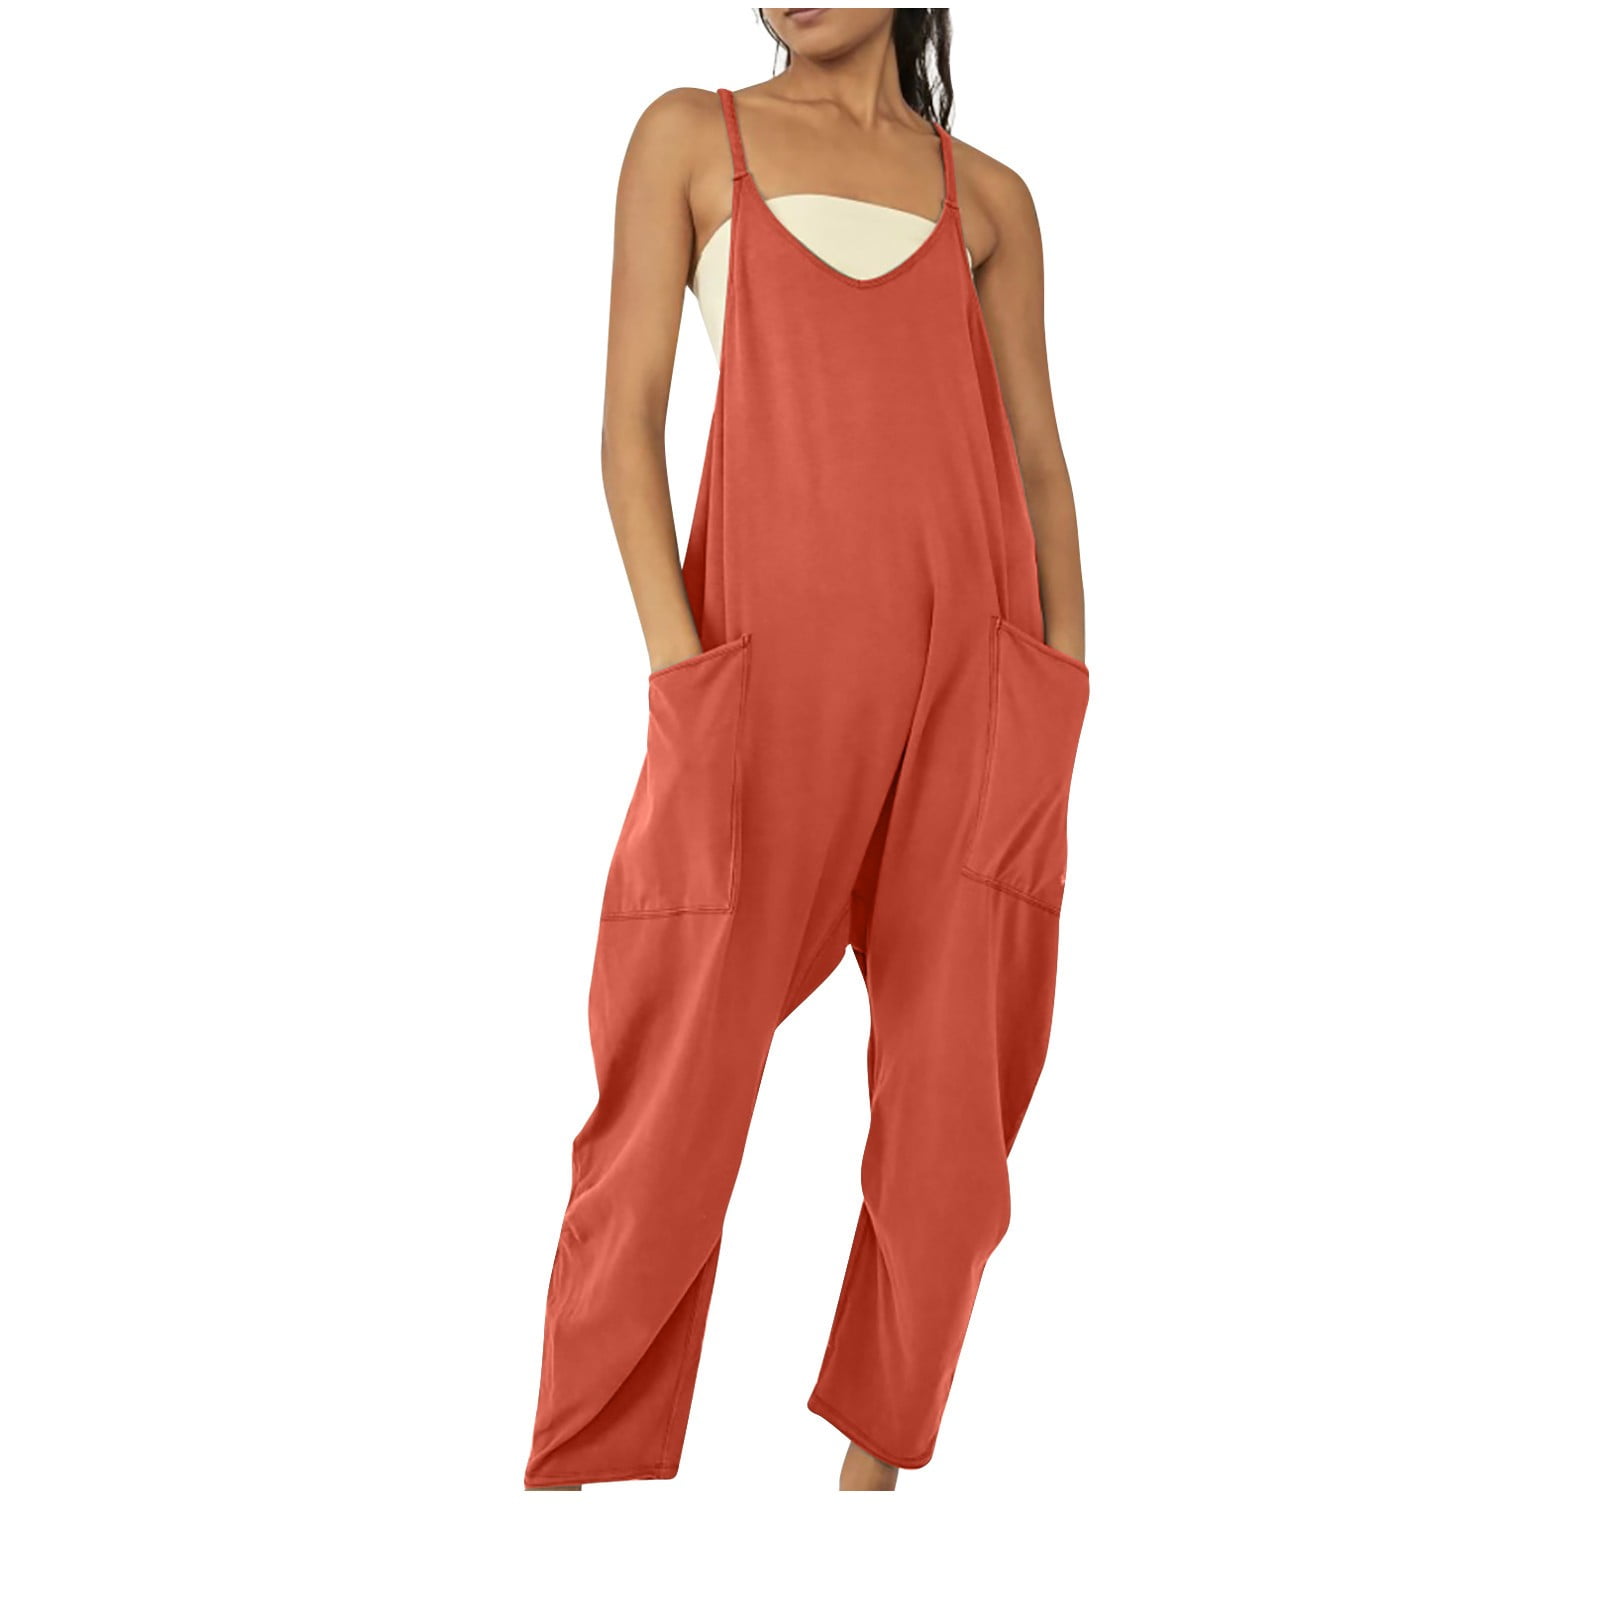 adviicd Cotton Jumpsuits For Women Women Yoga Rompers Workout